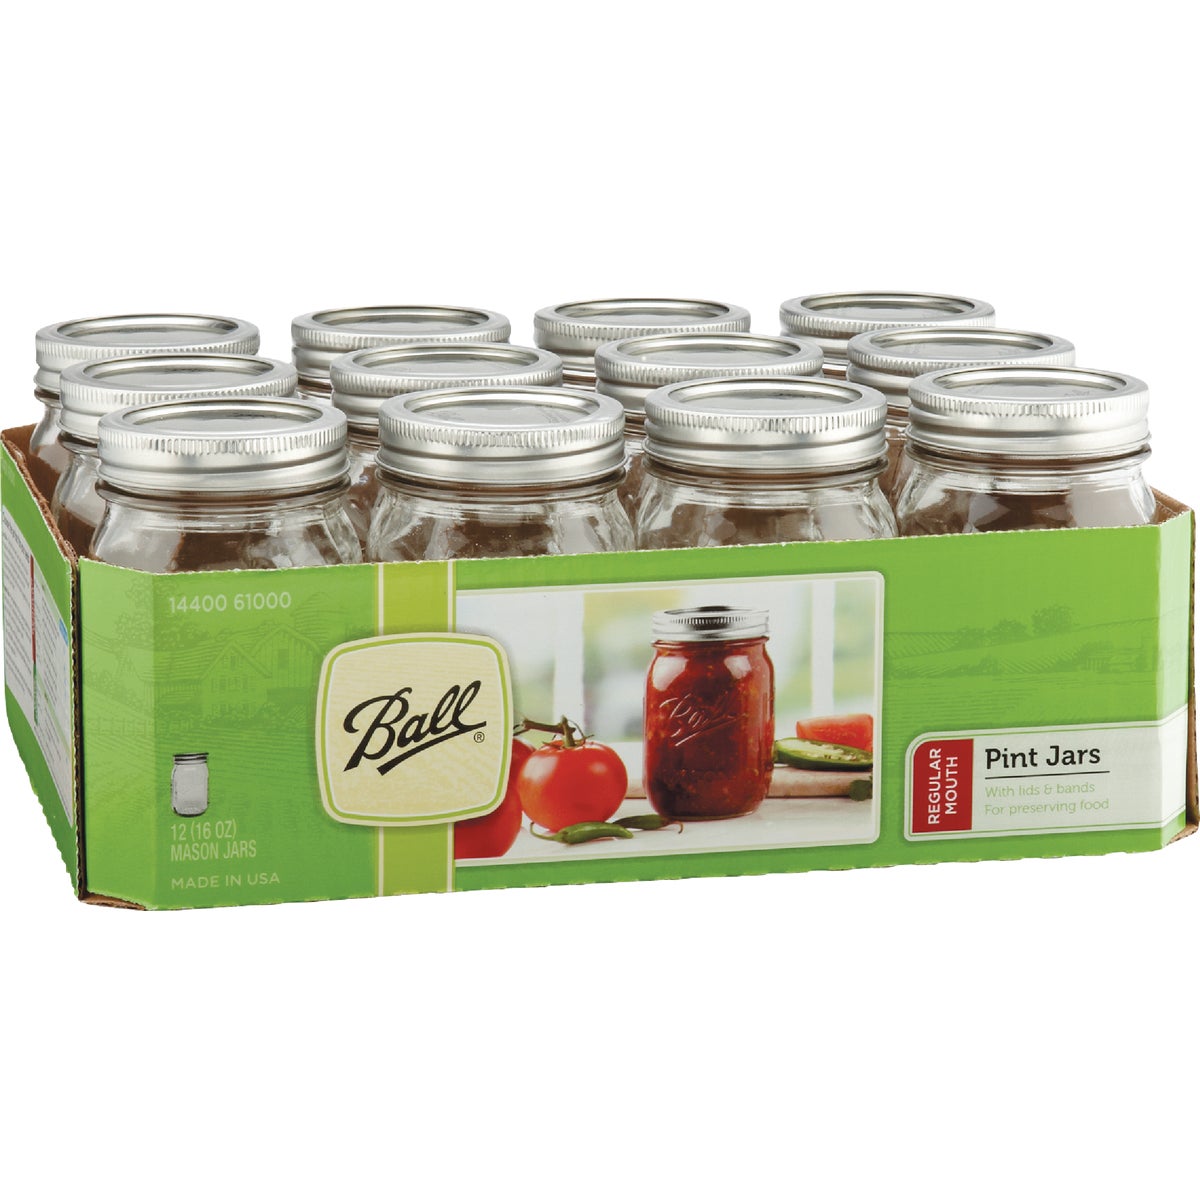 Item 630464, Featuring a classic design that offers ideal versatility for canning and 